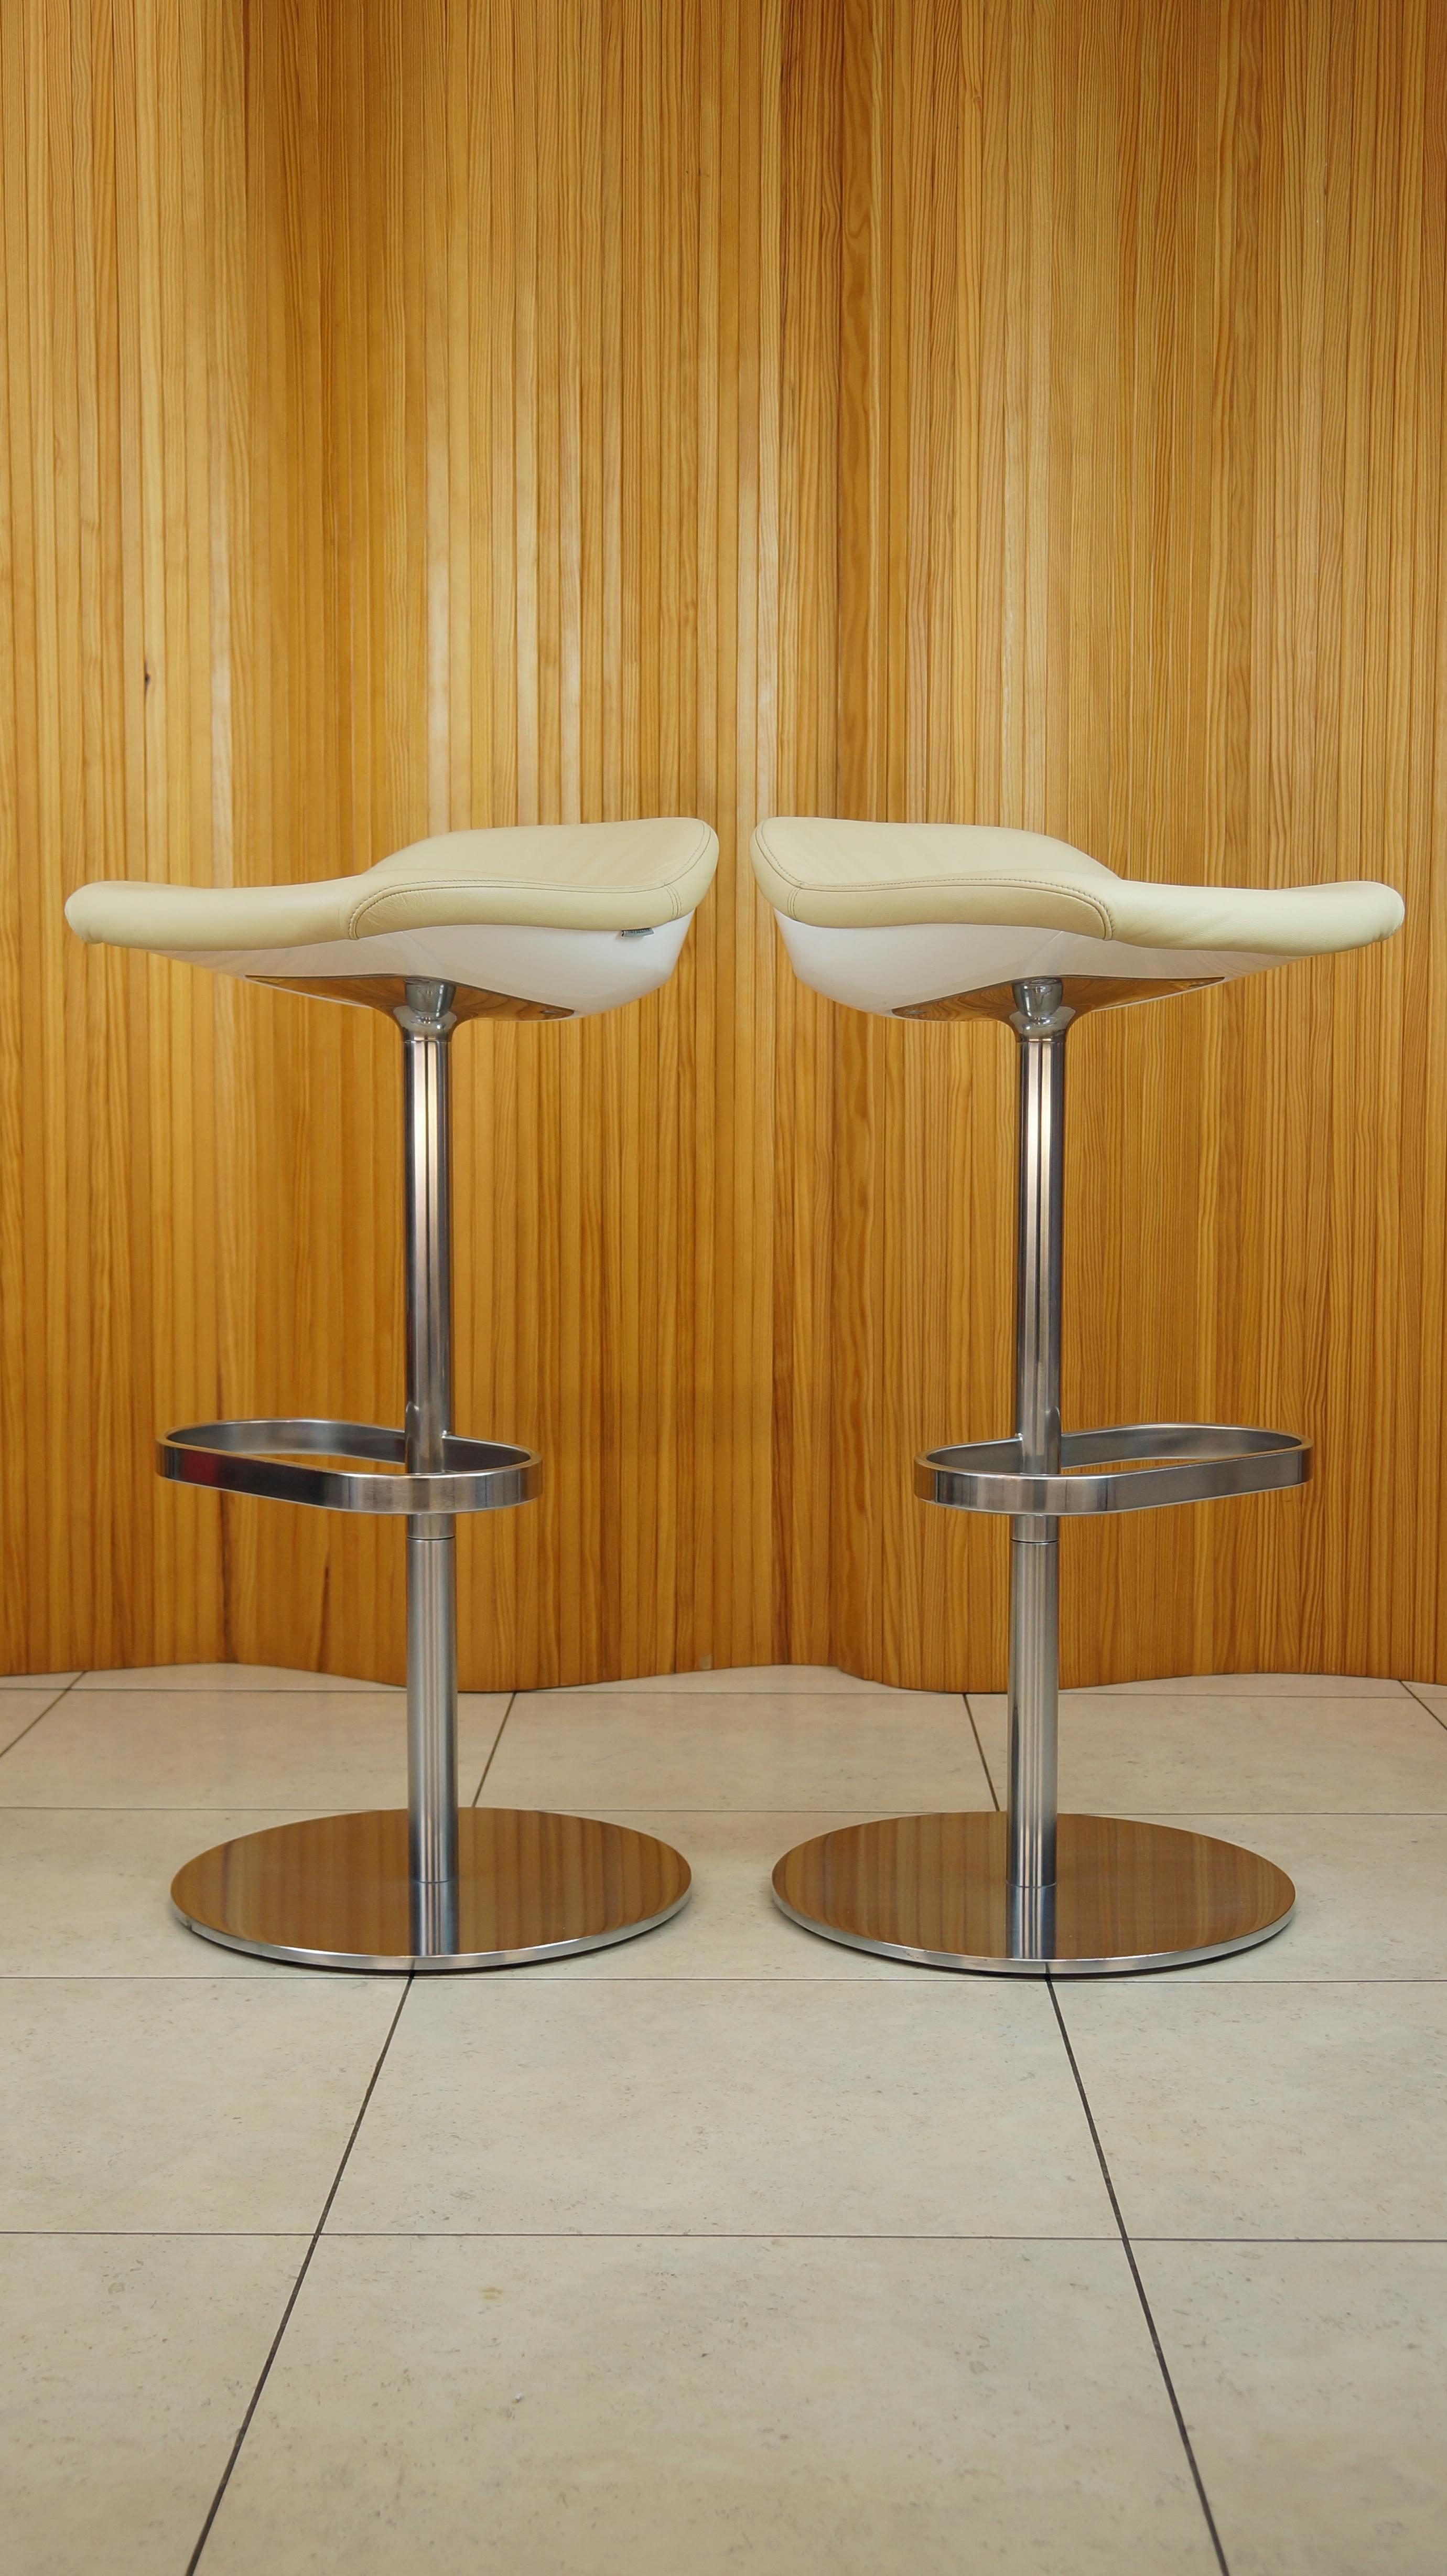 Pair (2) of Walter Knoll ‘Turtle’ bar stools by Pearson Lloyd 

Design year: 2005
Designer: Luke Pearson, Tom Lloyd renowned London design team
Maker: Walter Knoll

These sleek, bar stools ooze quality, are very heavy and supremely comfortable. They